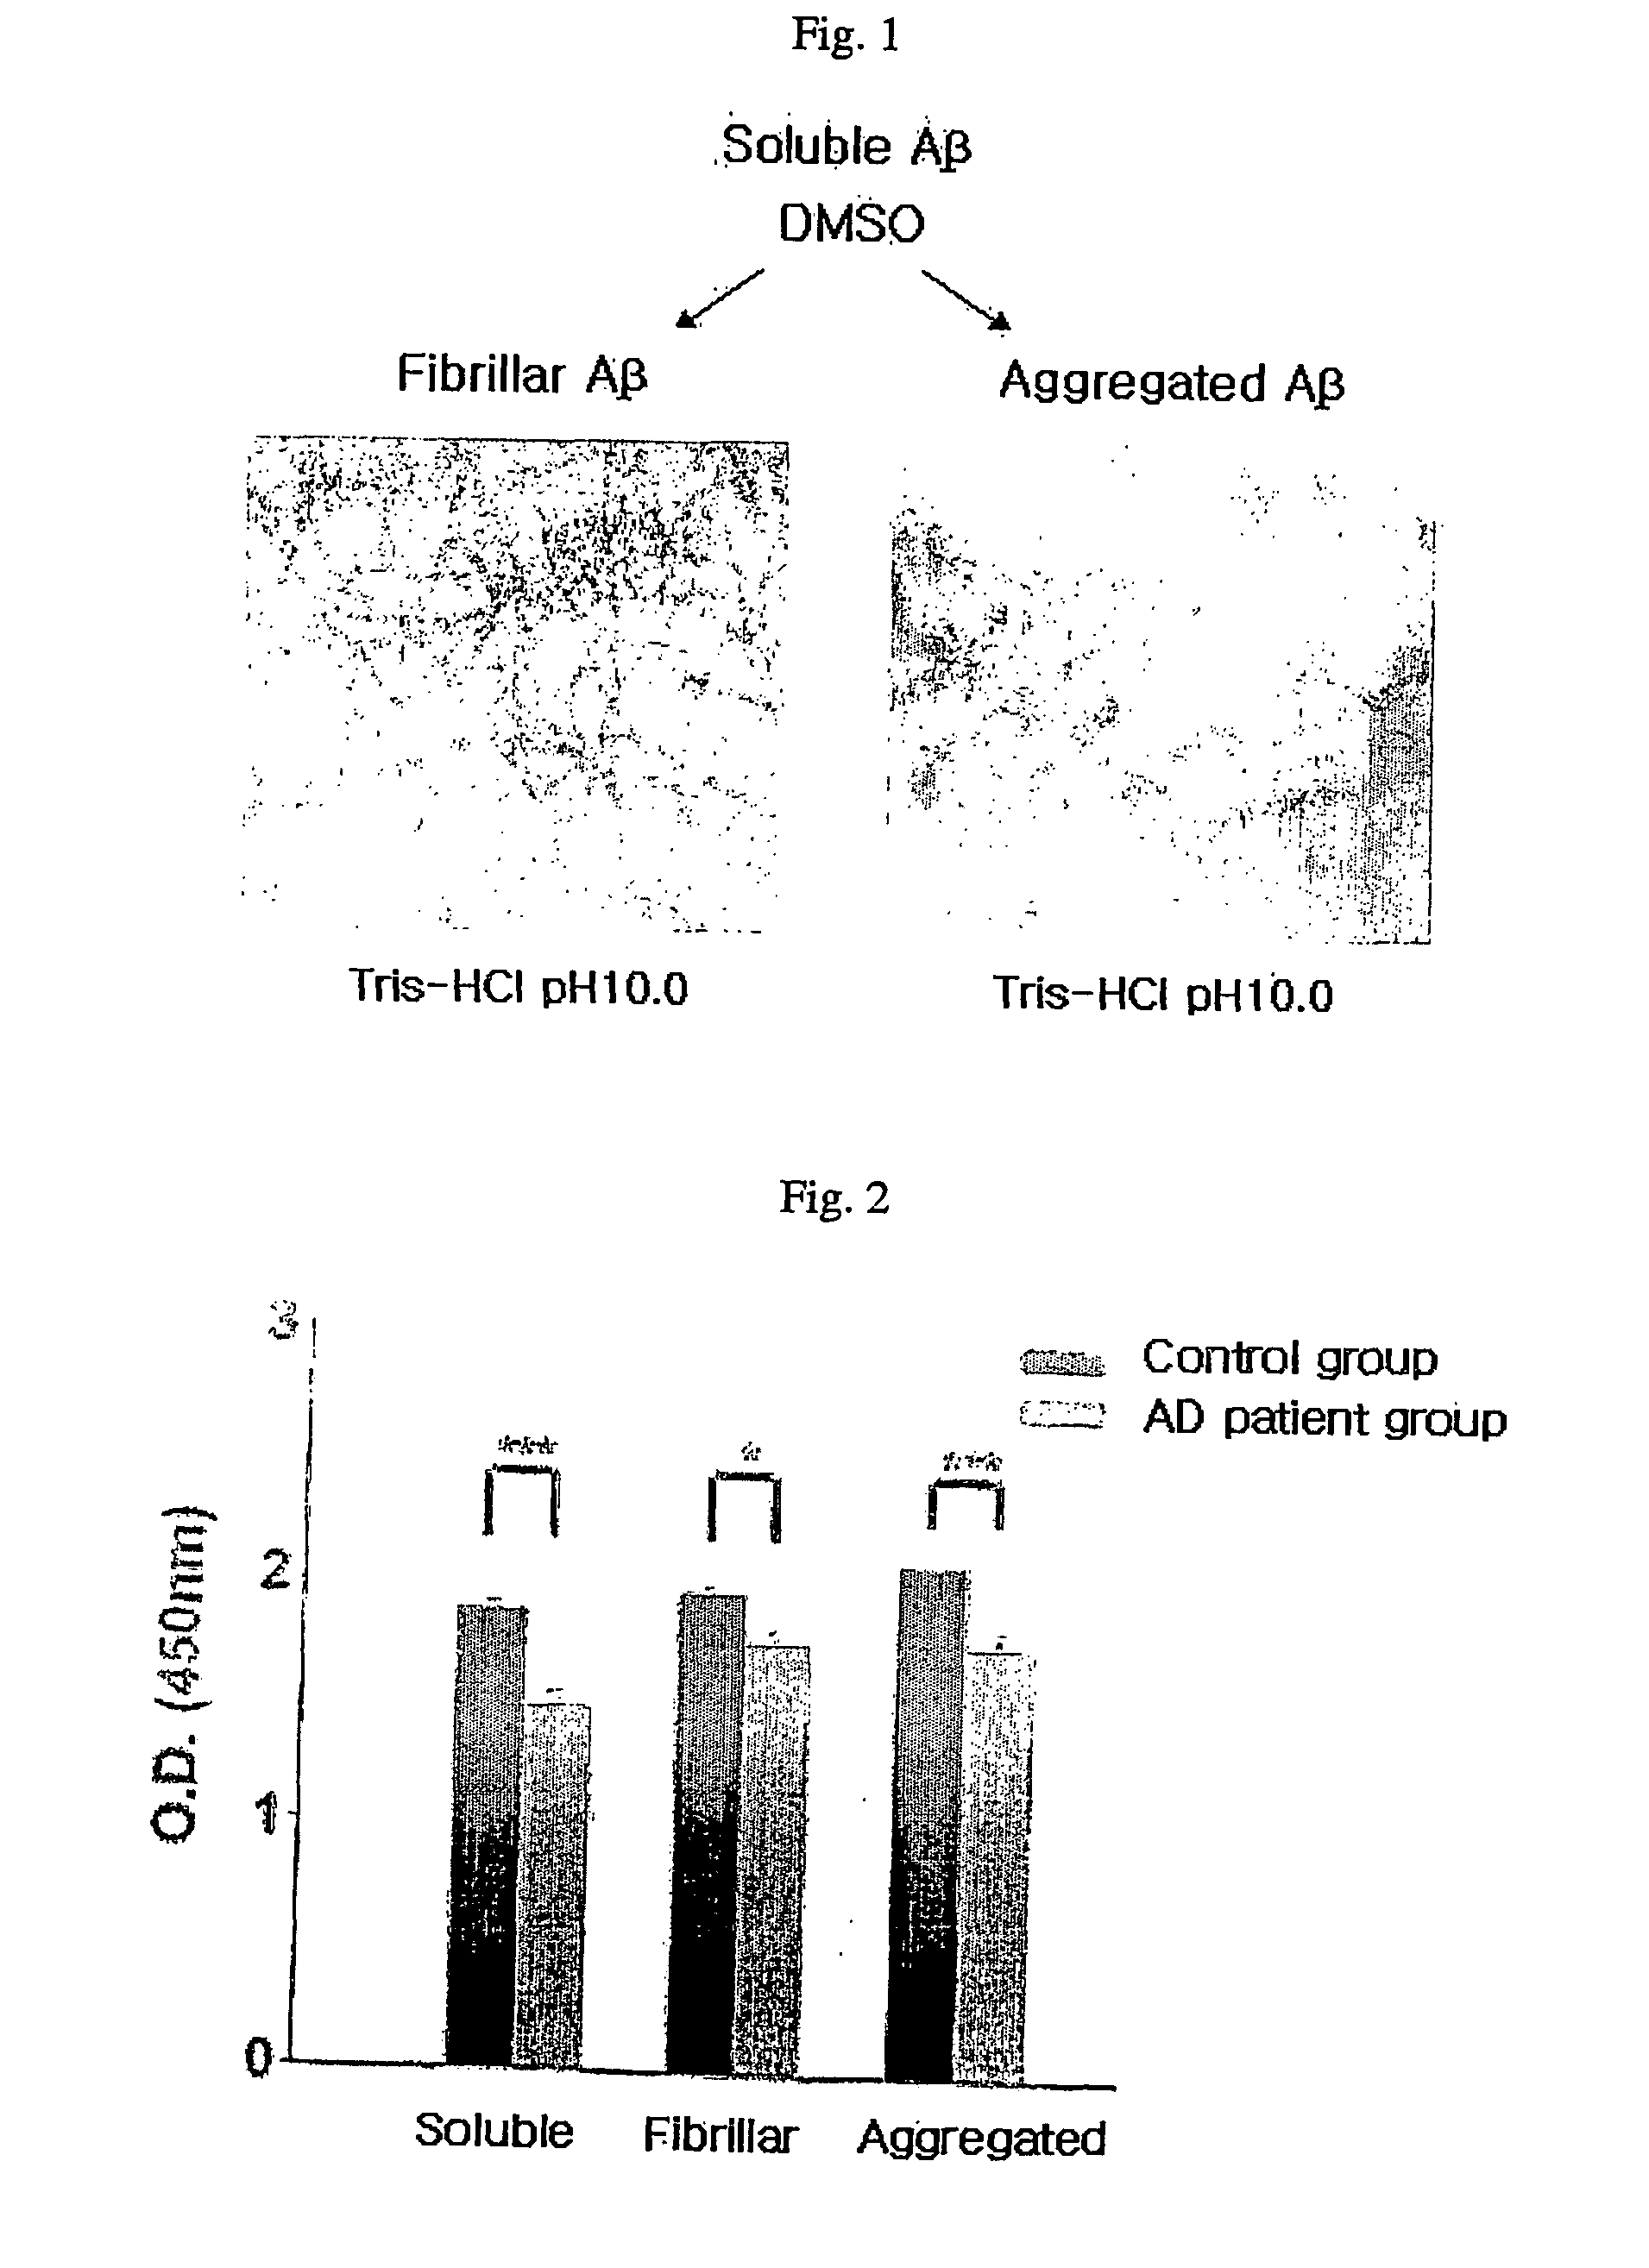 Method for measuring the level of anti-beta-amyloid antibody in body fluids and diagnostic kit for alzheimer's disease using same